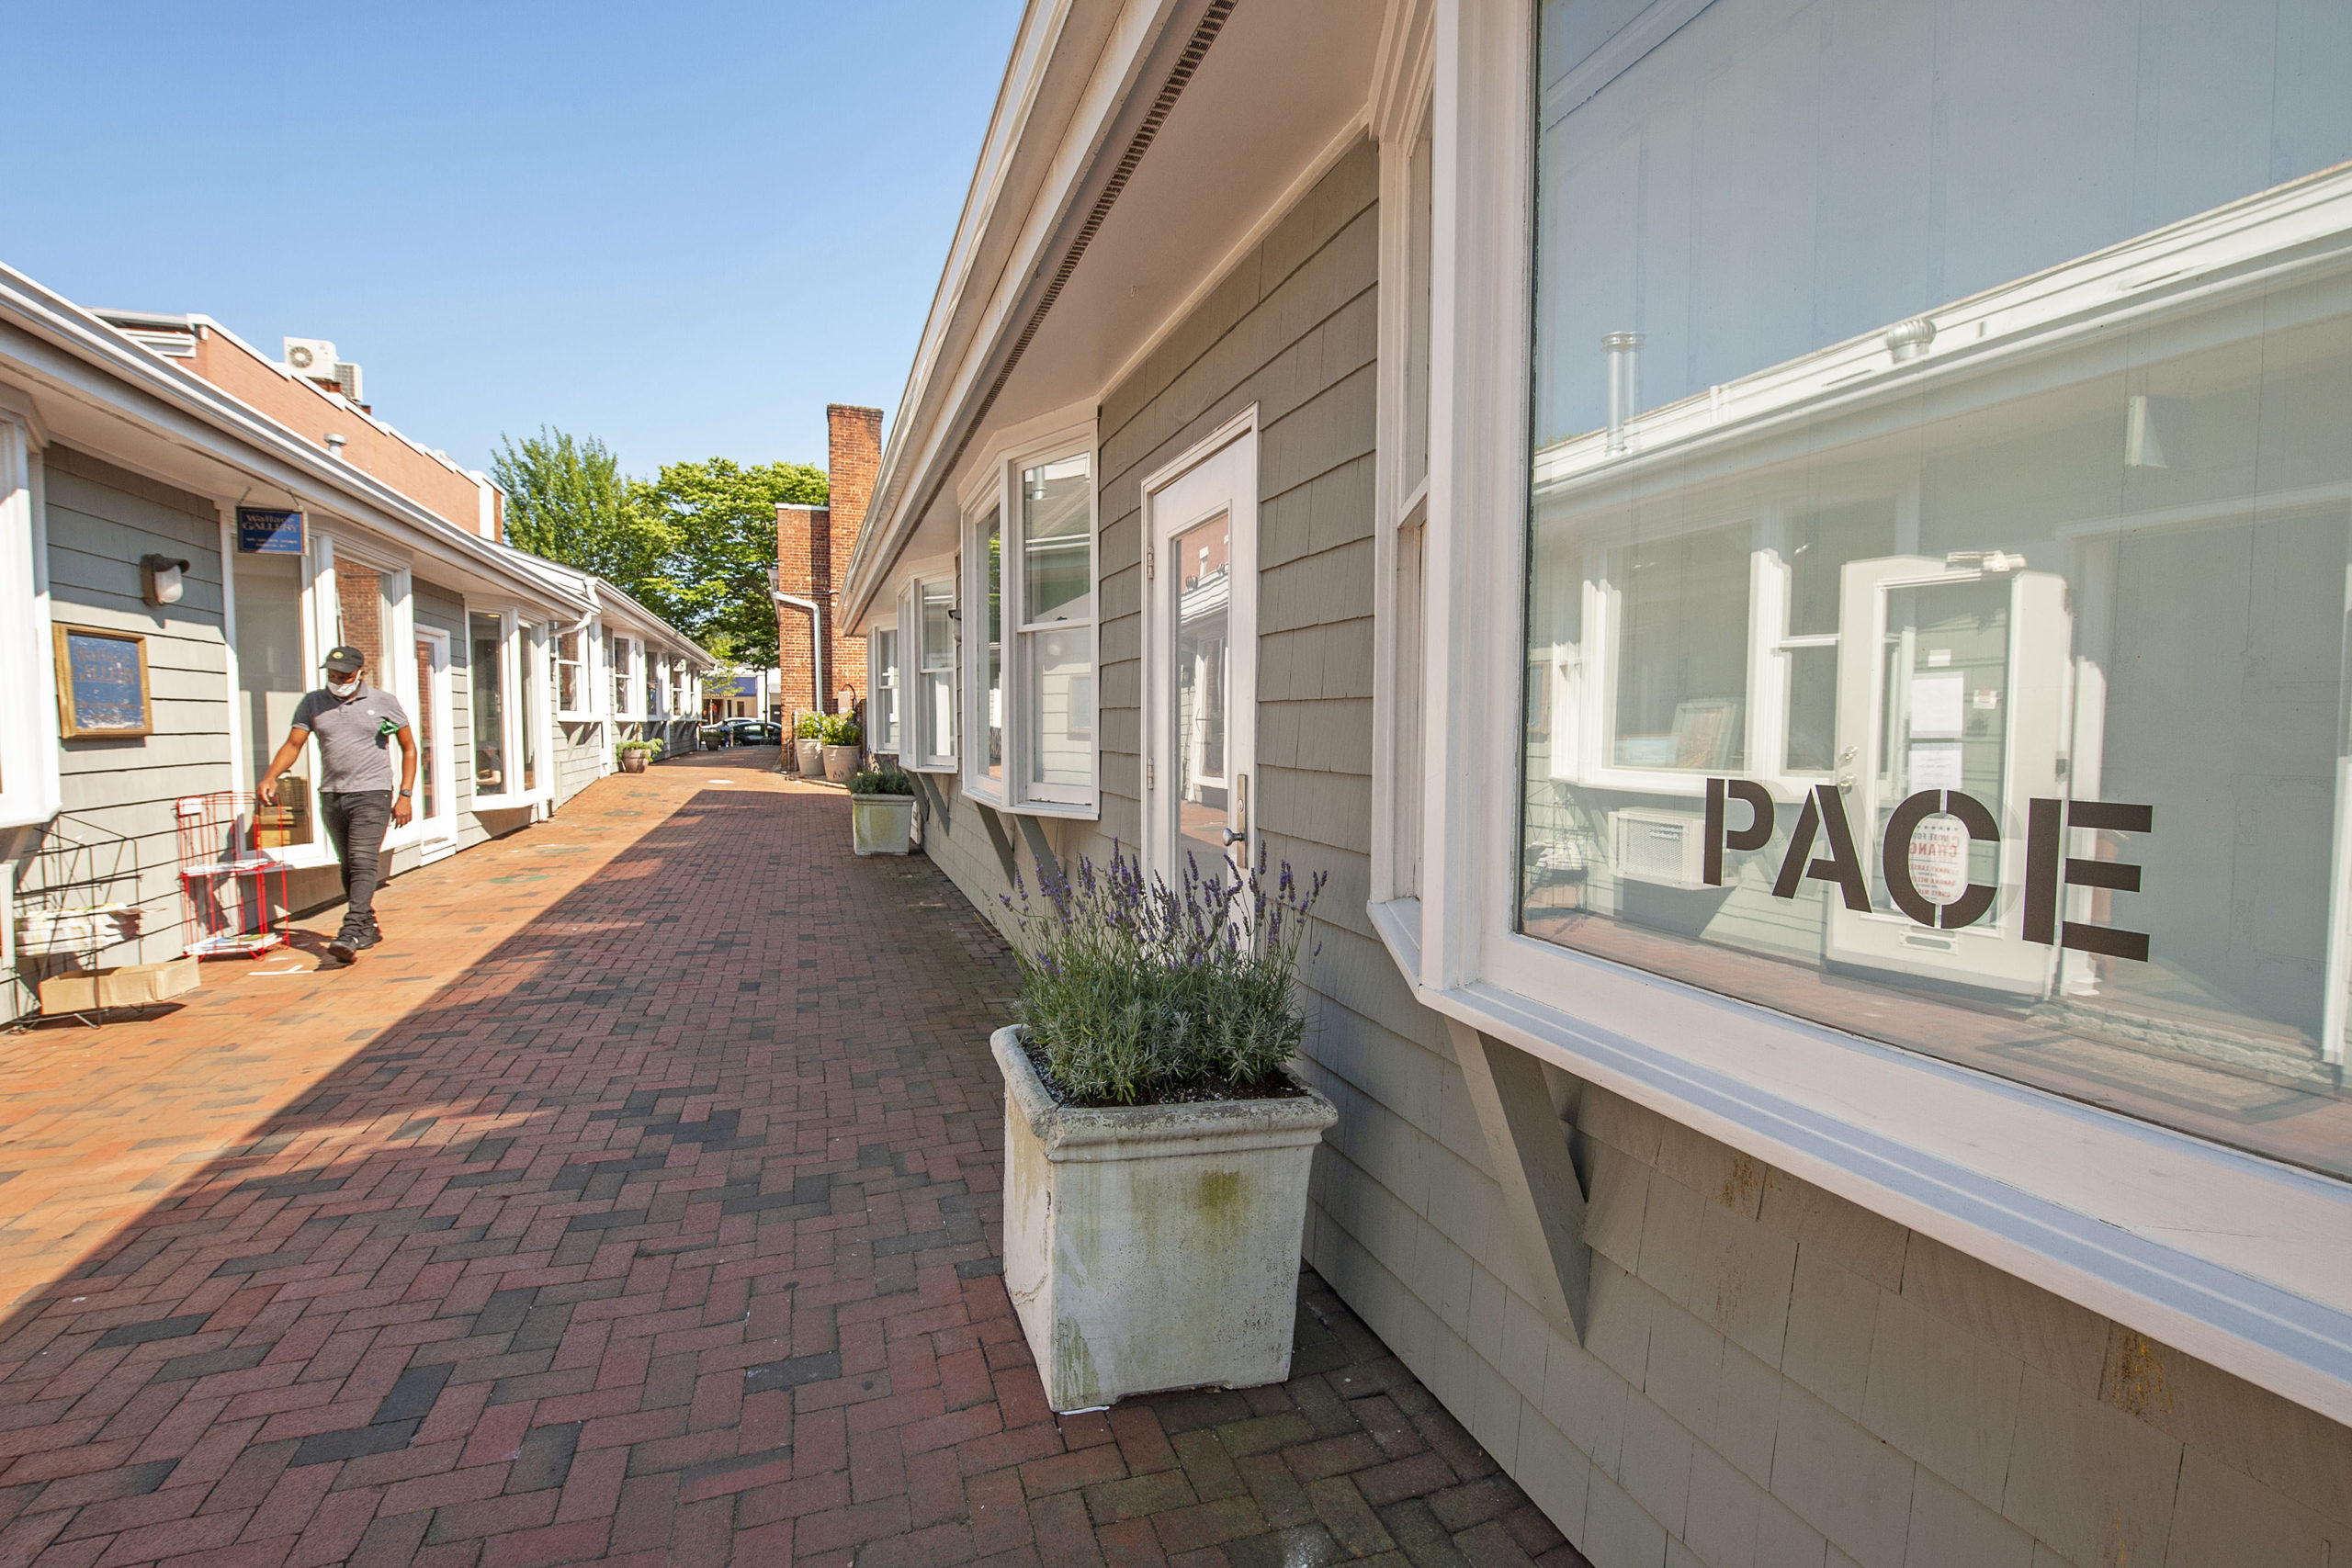 Pace Gallery in East Hampton.